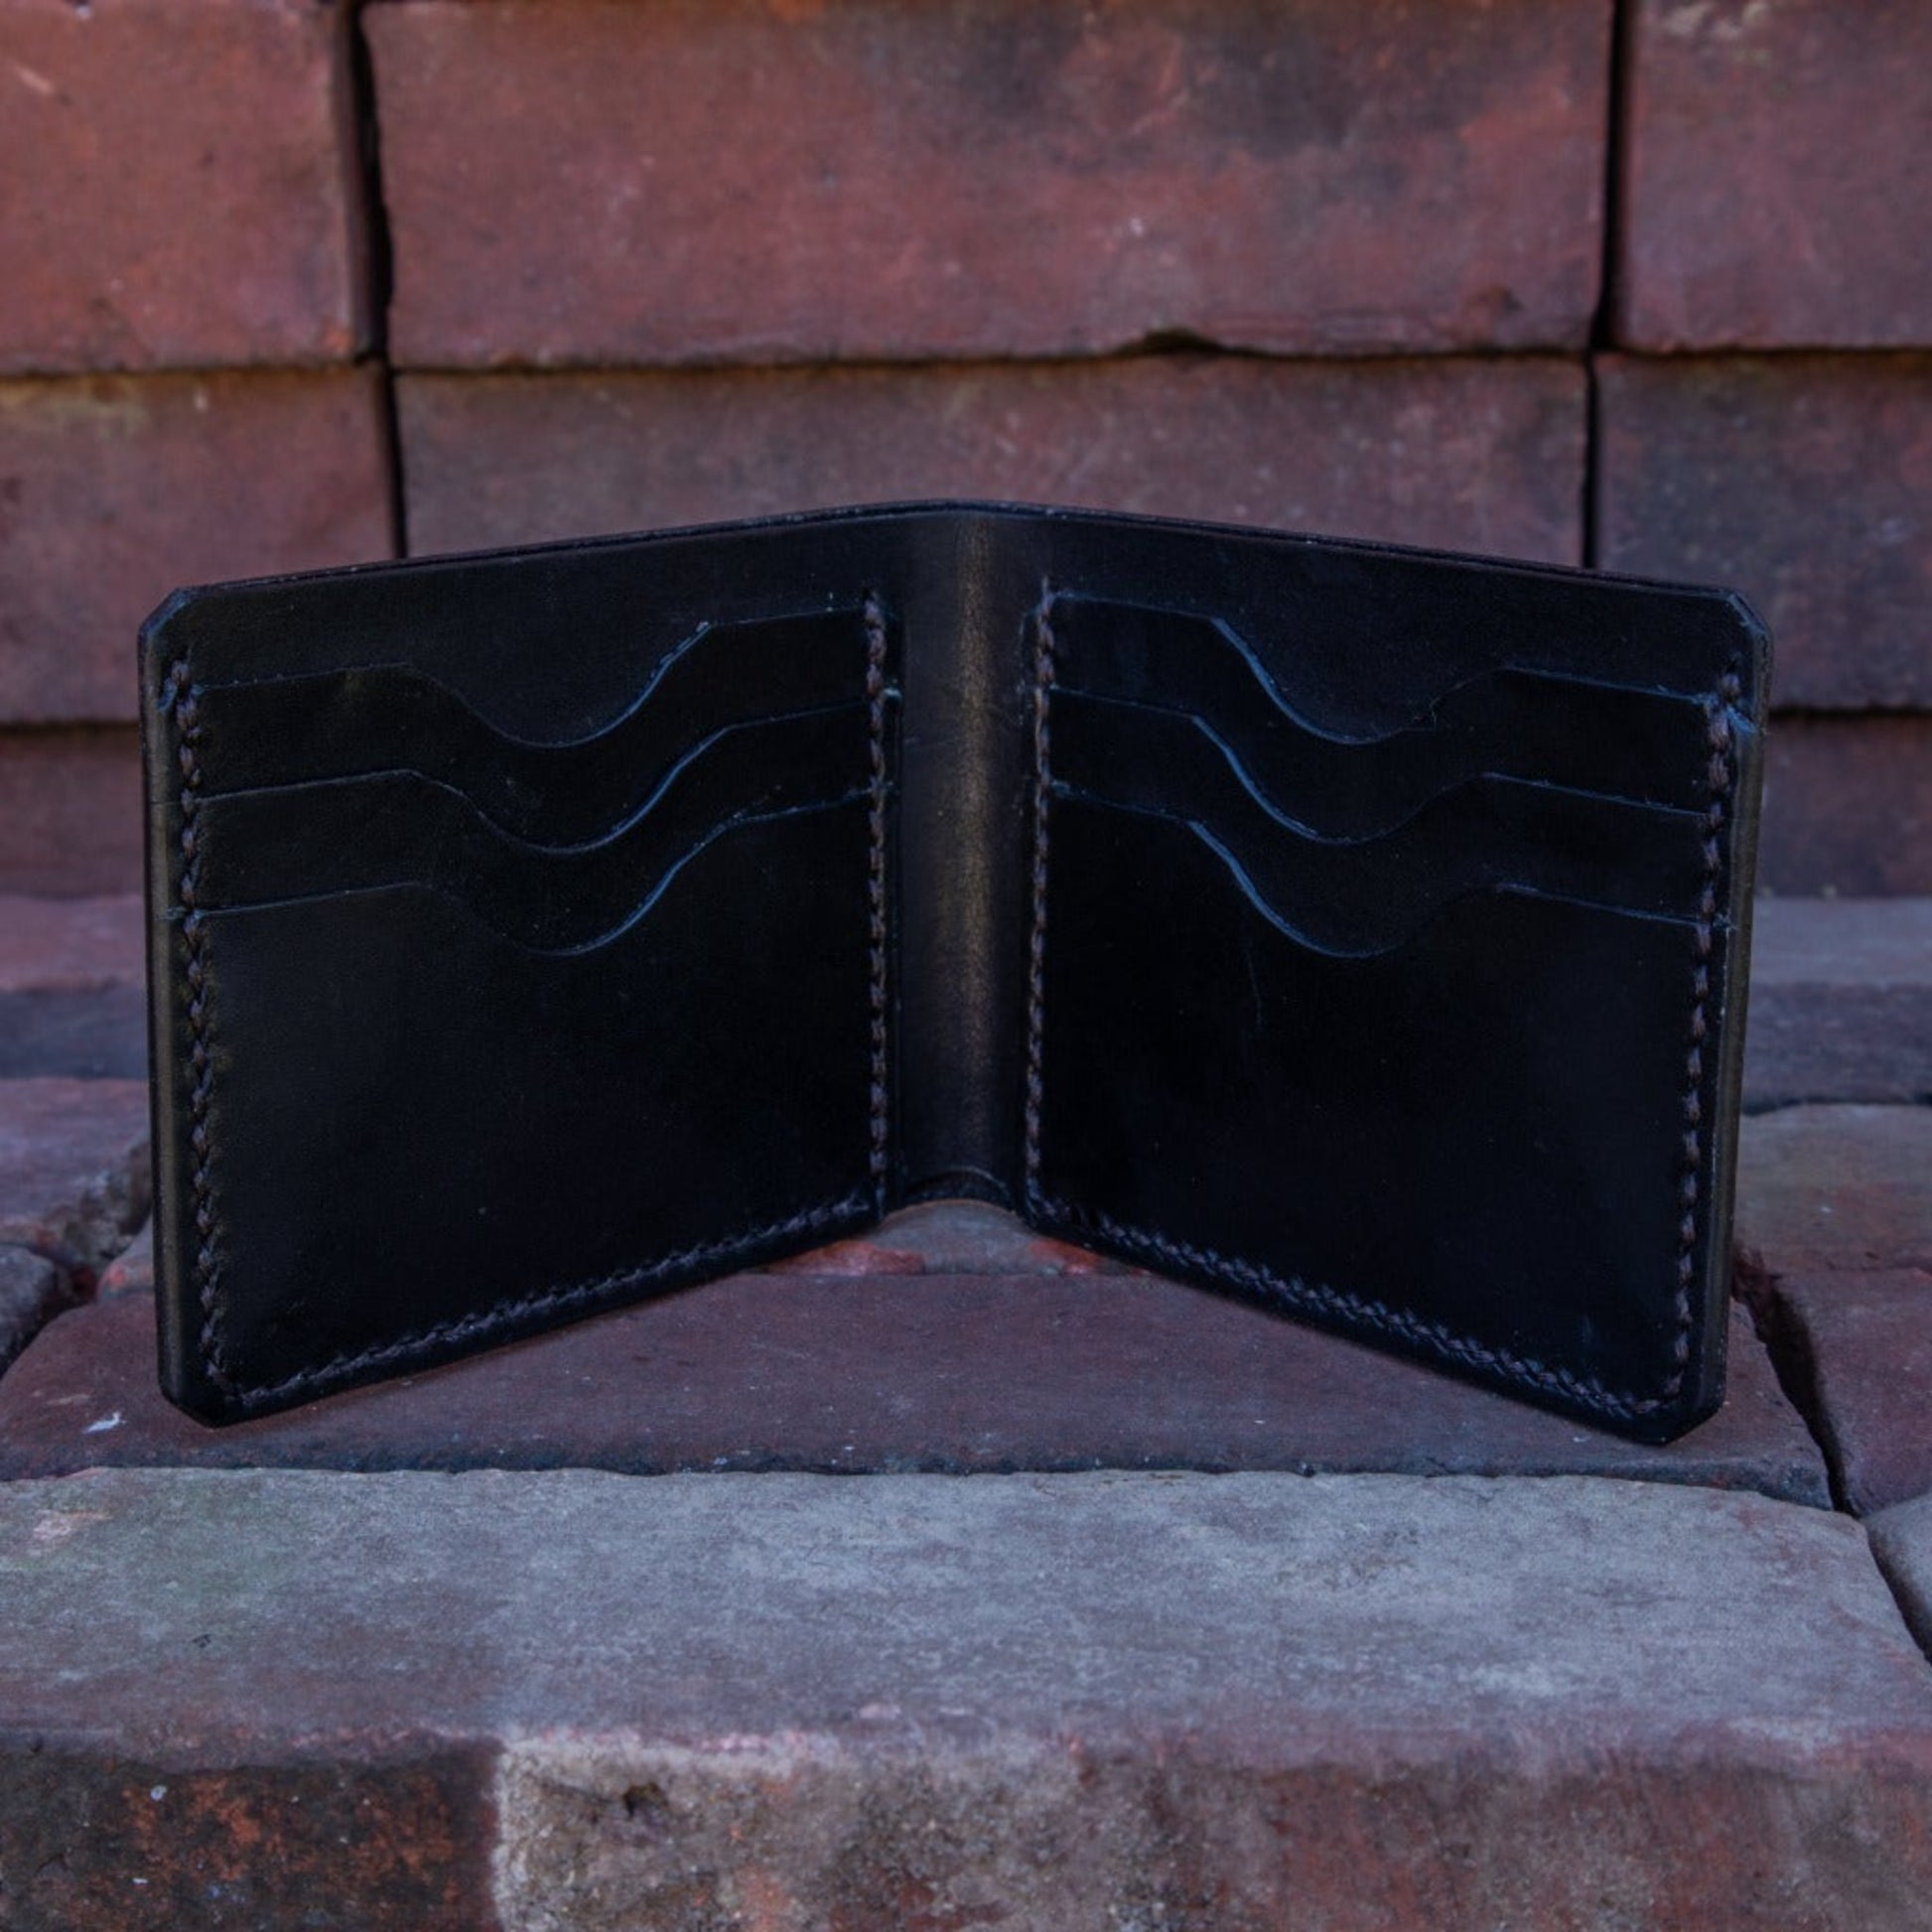 Flat Head for Wild Child Leather & Cordovan Wallet - Tan